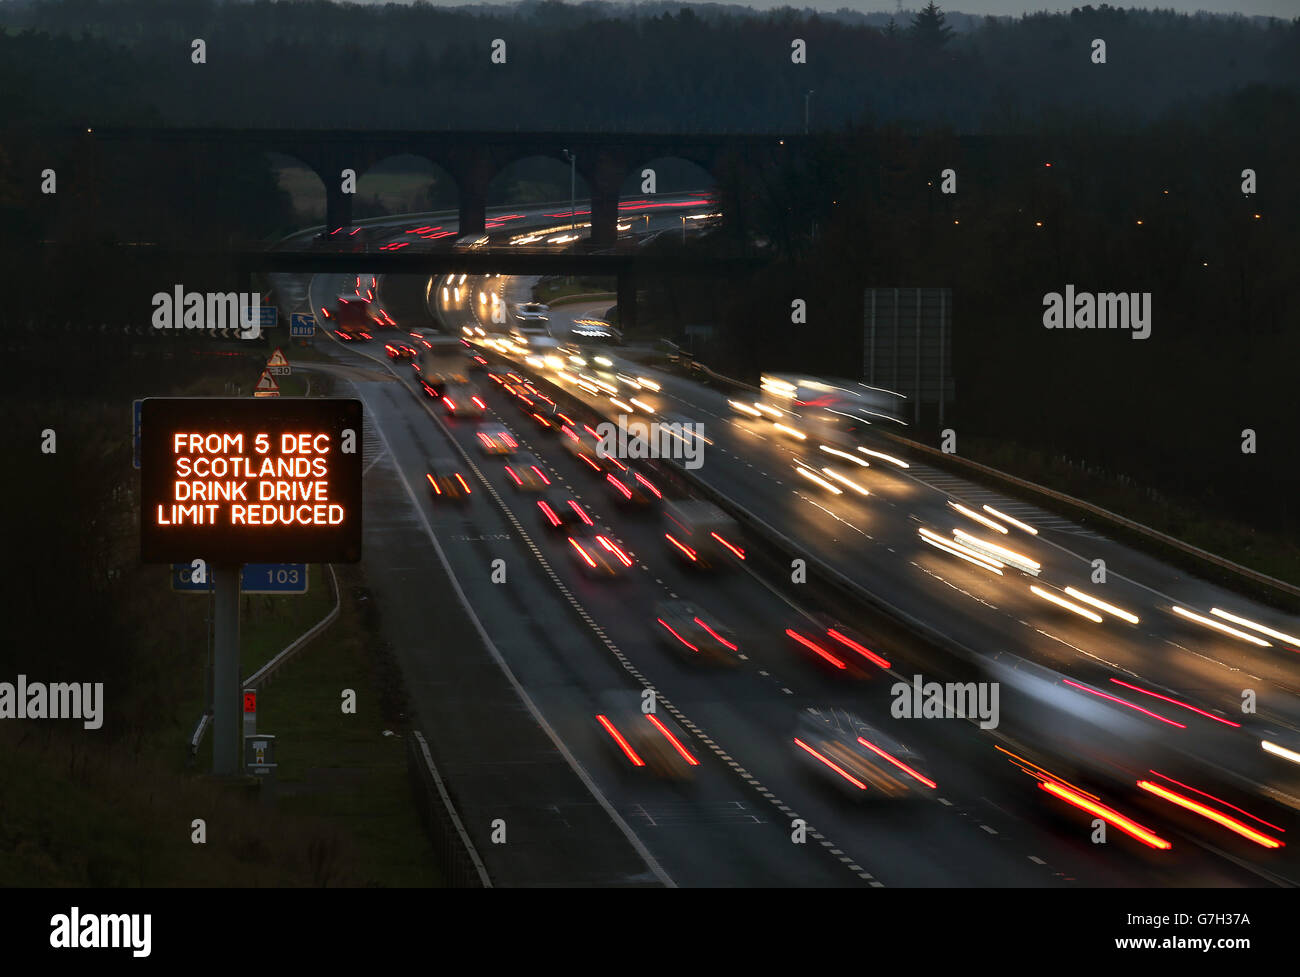 A traffic sign displaying a message for drivers on the M80 near Haggs alerting them to the reduction in drink drive limit on Friday. Stock Photo